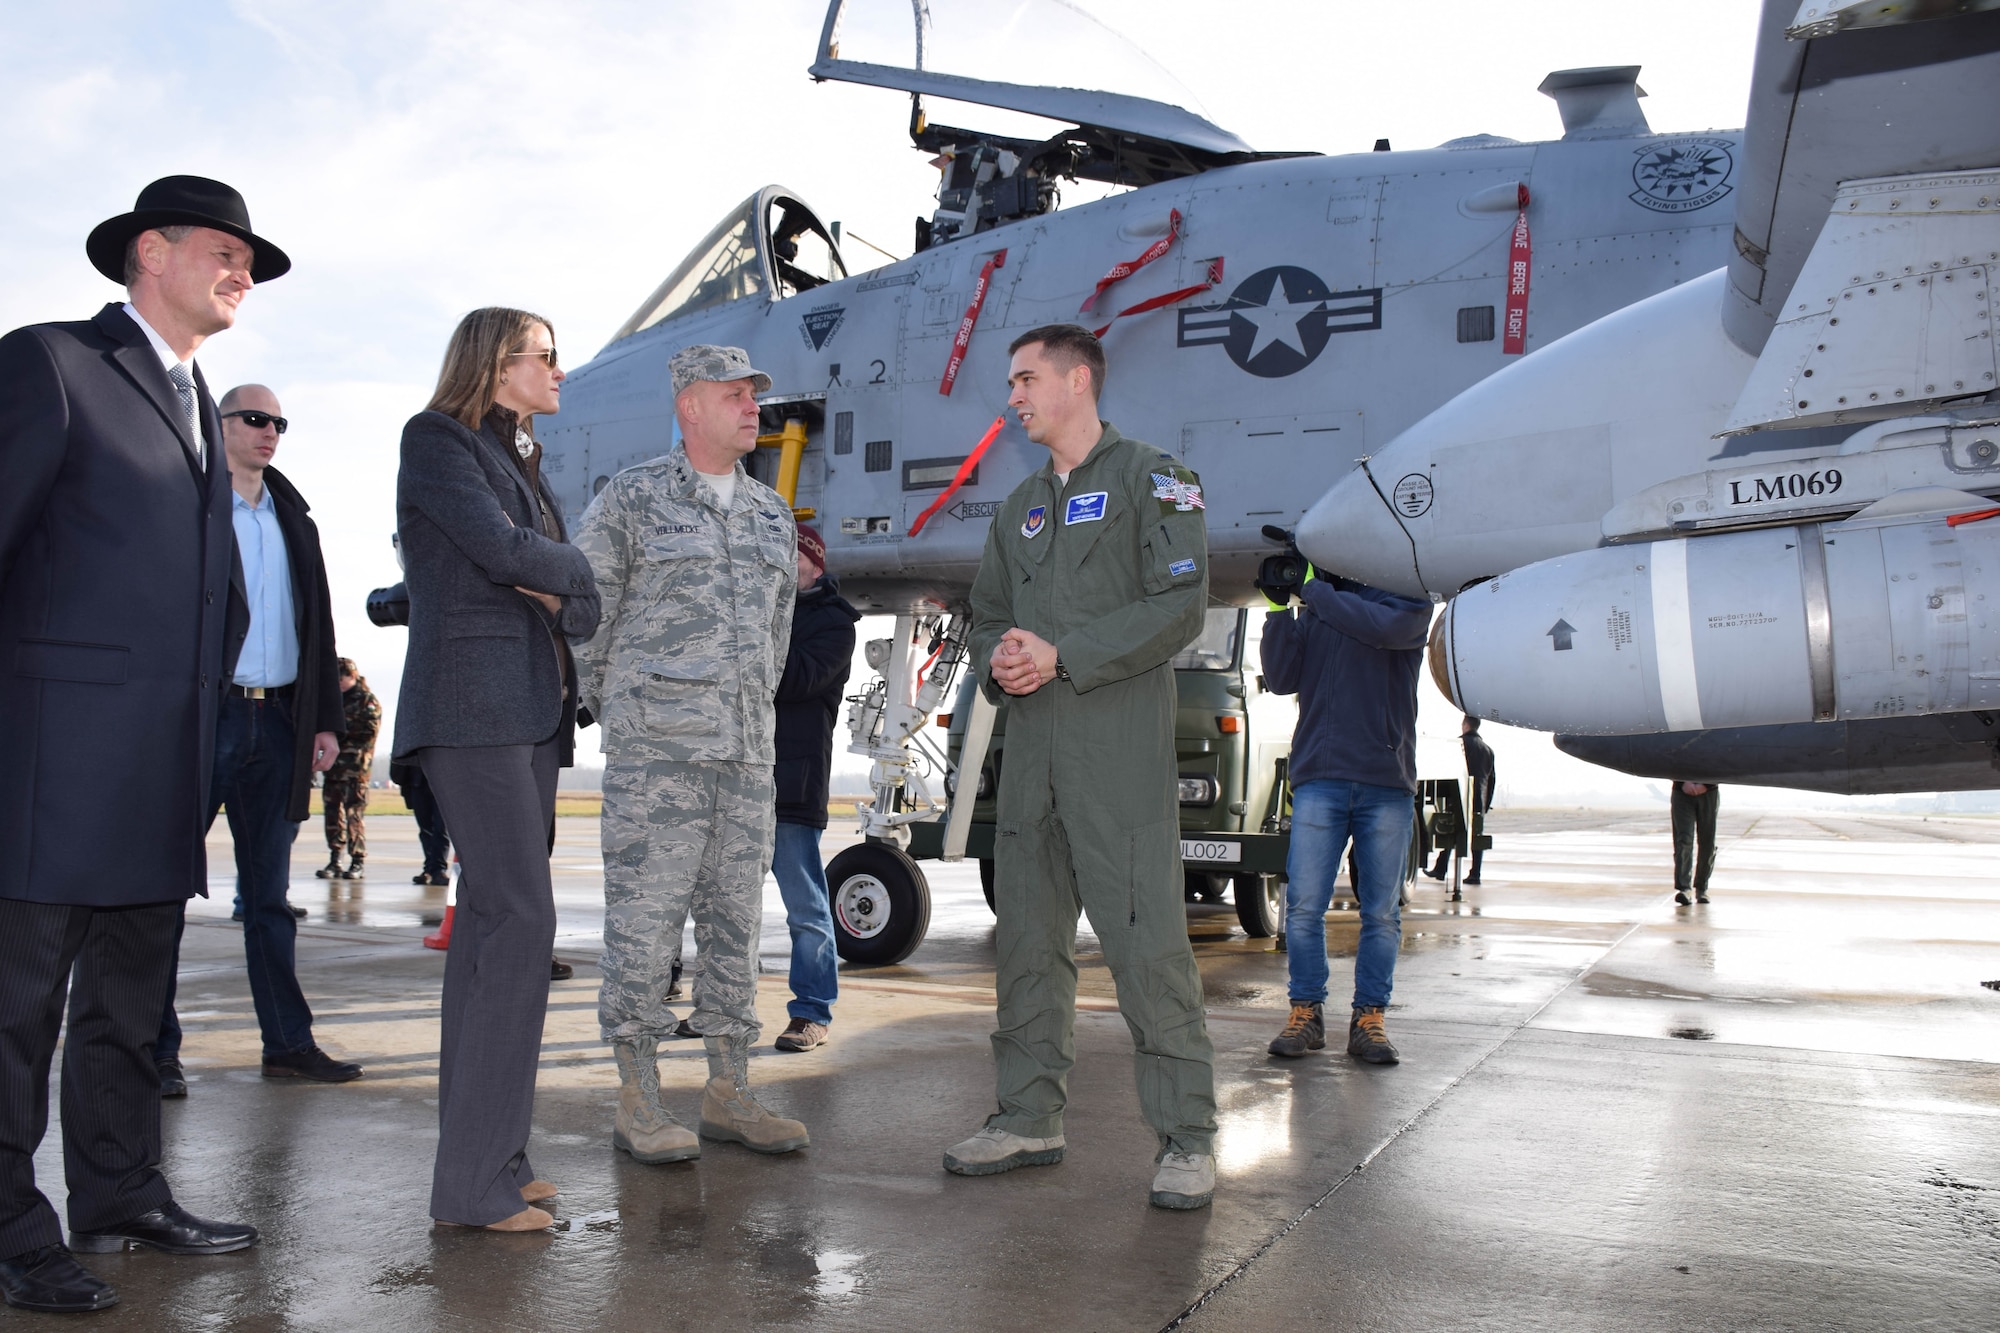 Maj. Gen. Vollmecke receives a briefing on the A-10C Thunderbolt II by 1st Lt. Mecadon of the 74th Expeditionary Fighter Squadron during a visit to Papa Air Base, Hungary, Dec. 2. The 74th EFS forward deployed to Hungary as part of Theater Security Package to conduct training and exercises alongside the Hungarian Air Force to increase readiness and enhance interoperability. Vollmecke was accompanied by U.S. Ambassador to Hungary, Colleen Bell and Mr. Peter Siklosi, the Hungarian MoD Deputy State Secretary for Defense Policy and Defense Planning, (U.S. Air Force photo/ Capt. Lauren Ott)